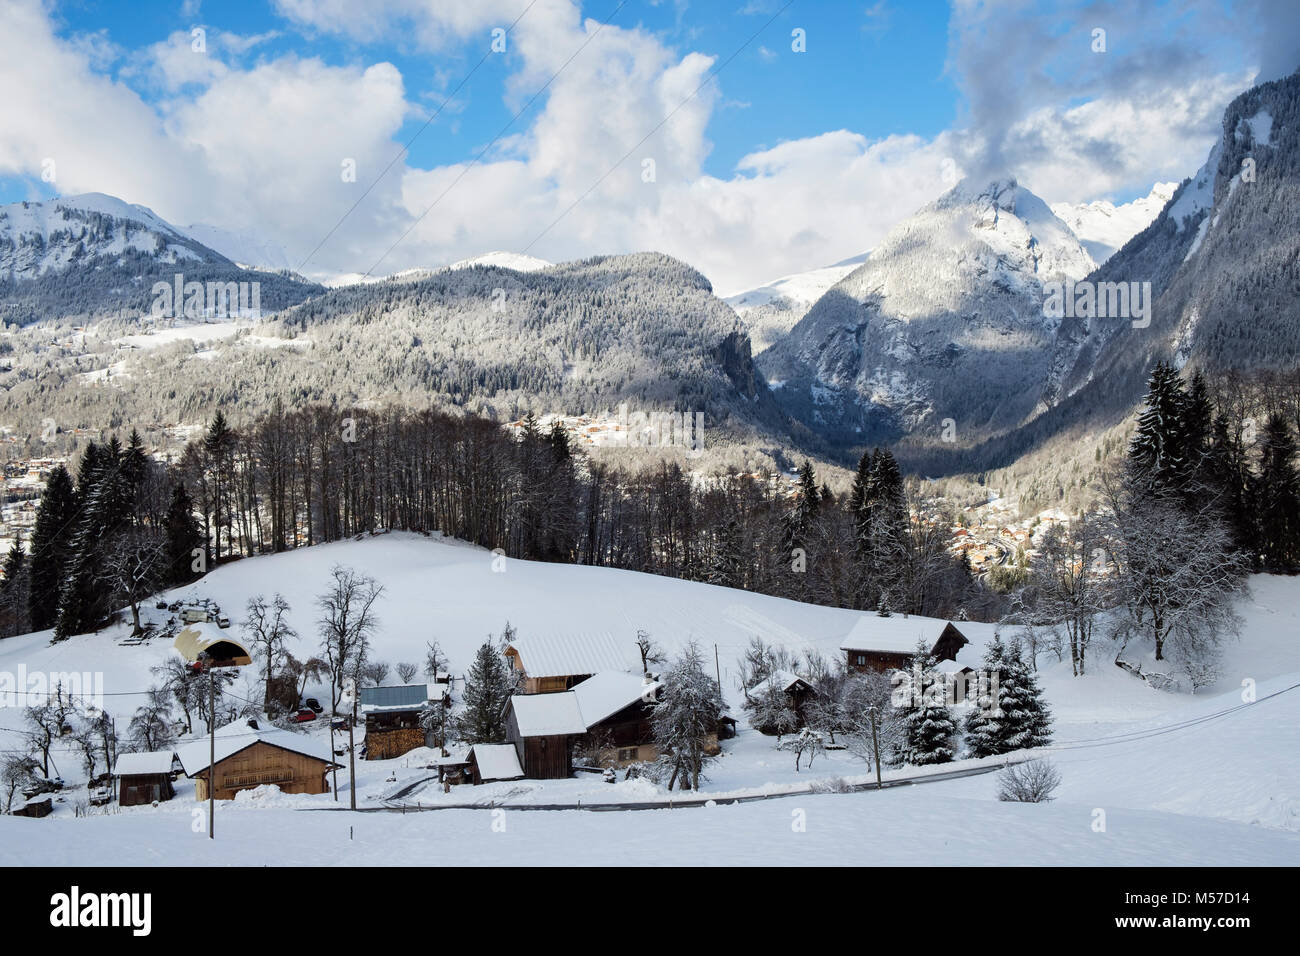 View above traditional chalets on mountainside with winter snow on mountains in French Alps above village of Samoens, Vallée du Giffre, France, EU Stock Photo